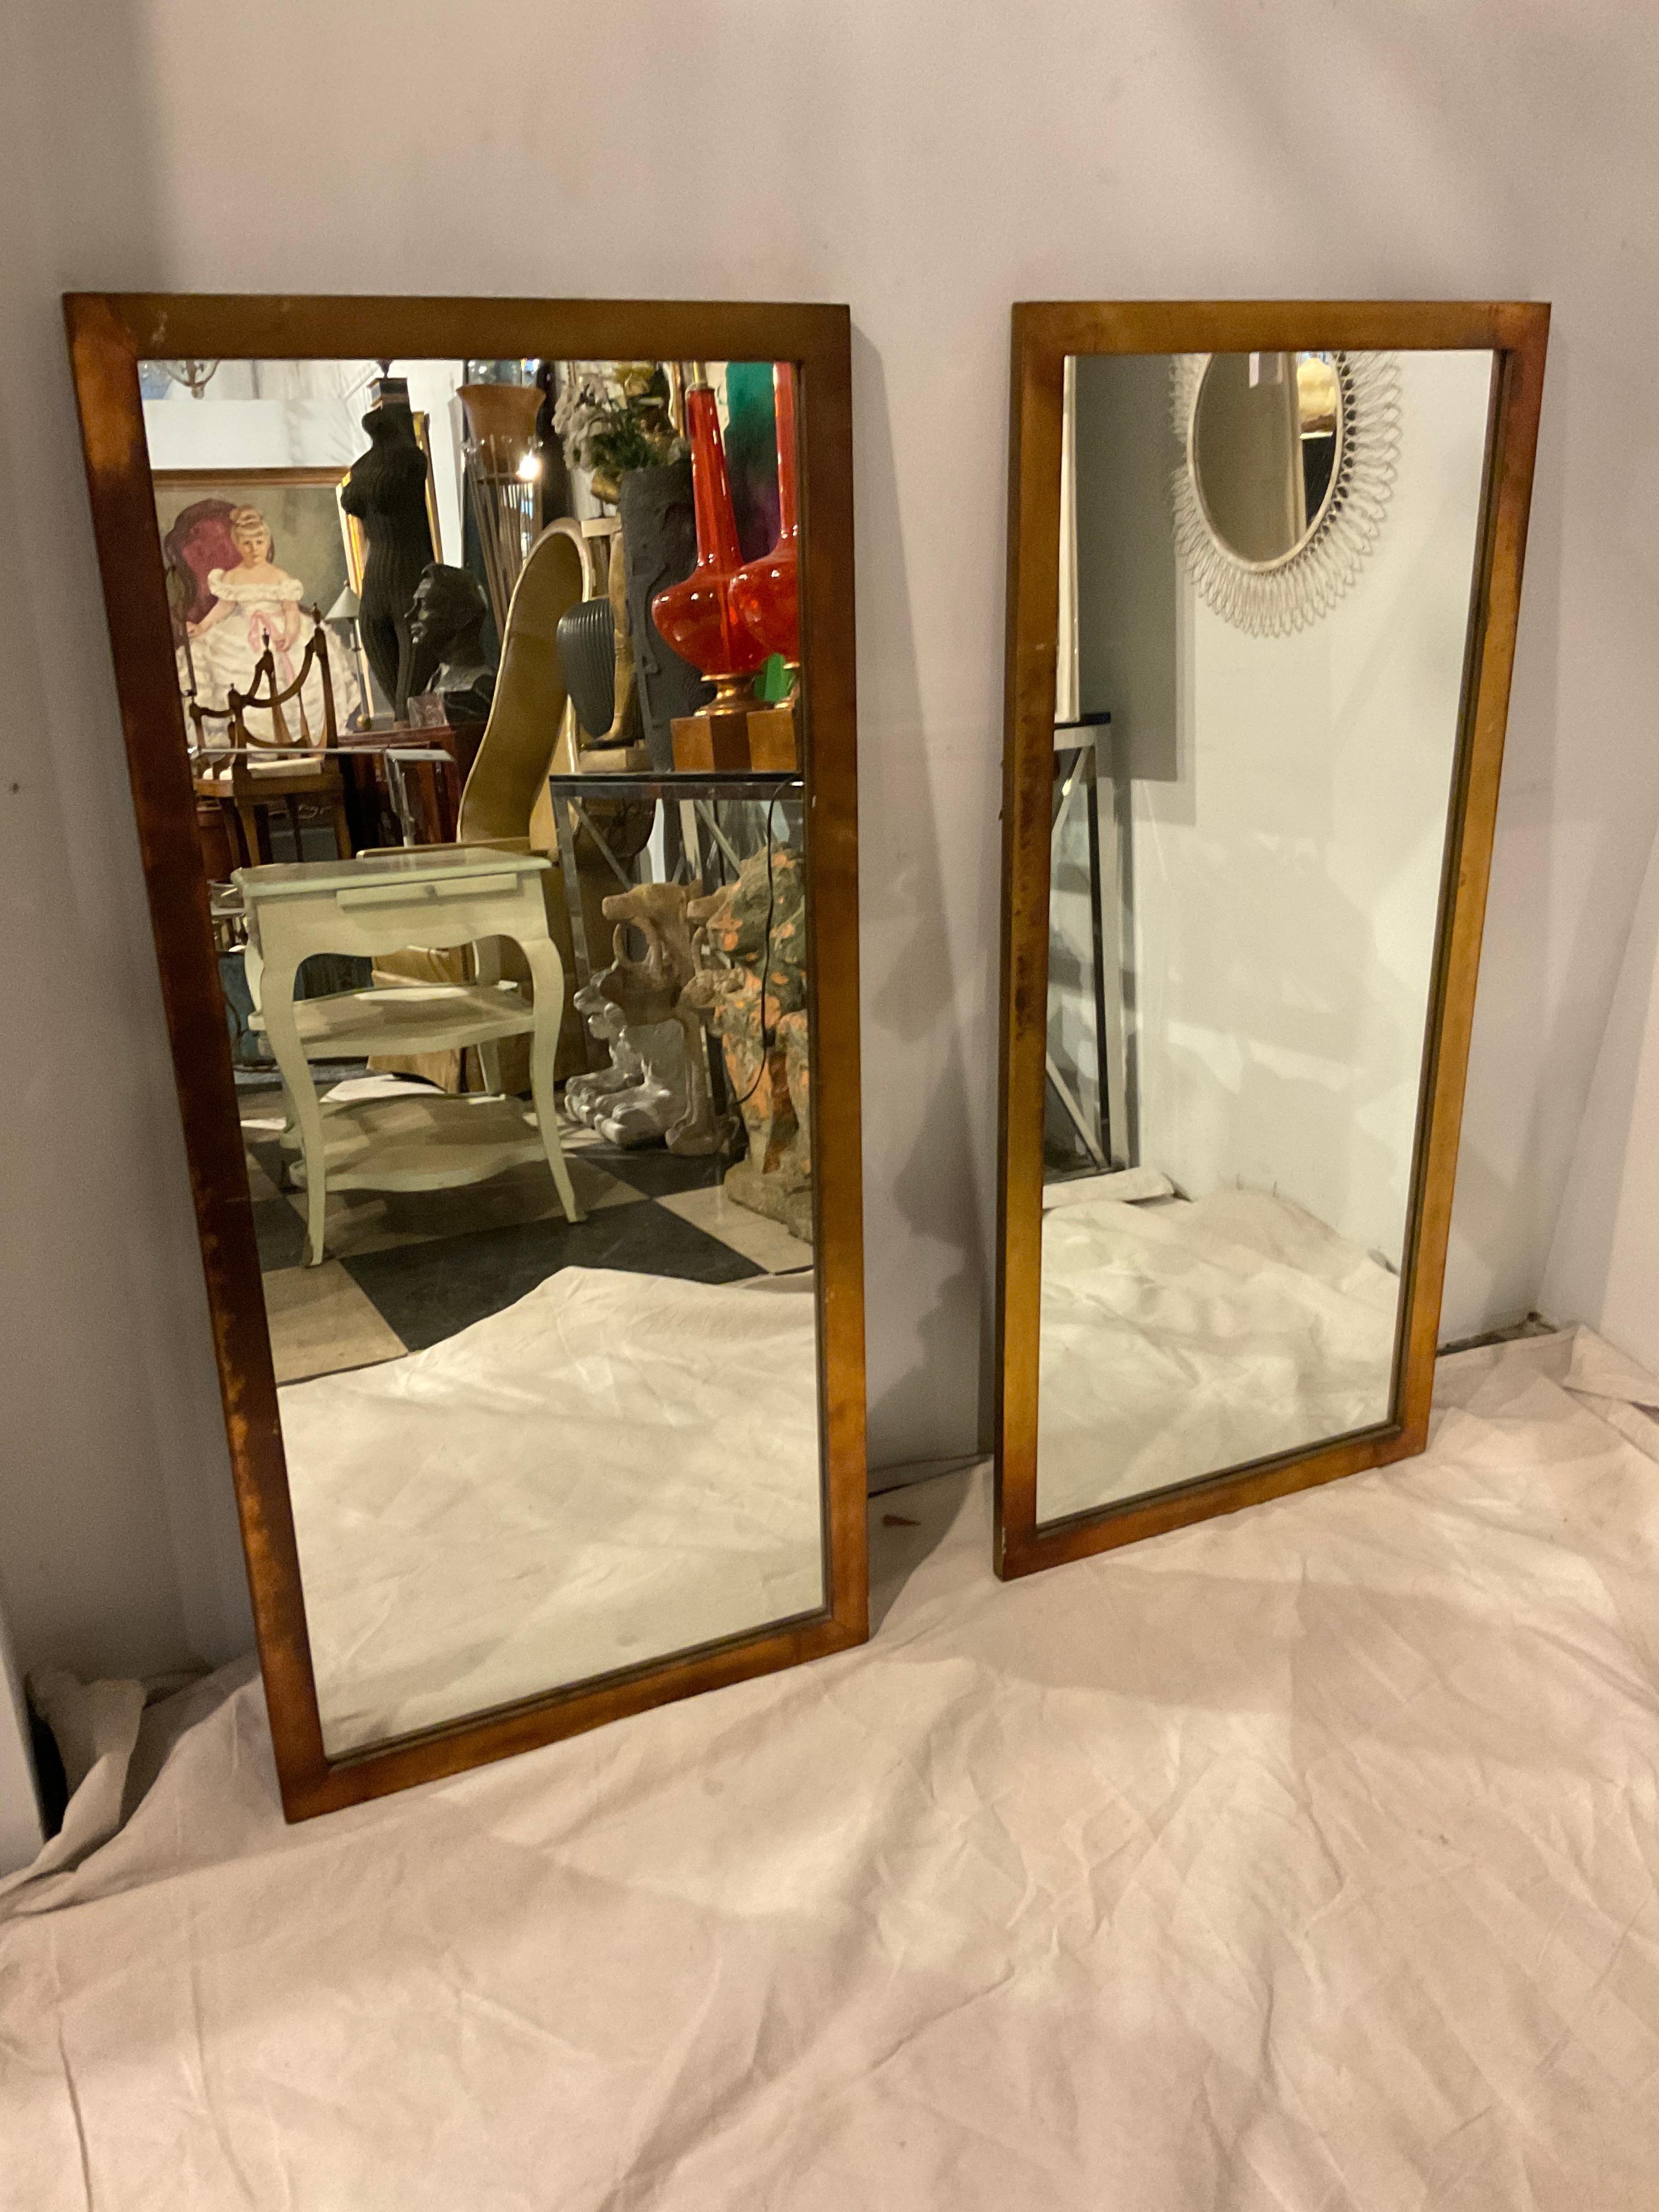 A pair of 1960s gold metallic finish , wood mirrors .
These mirrors can probably be shipped through UPS, but there would be an additional packing charge.